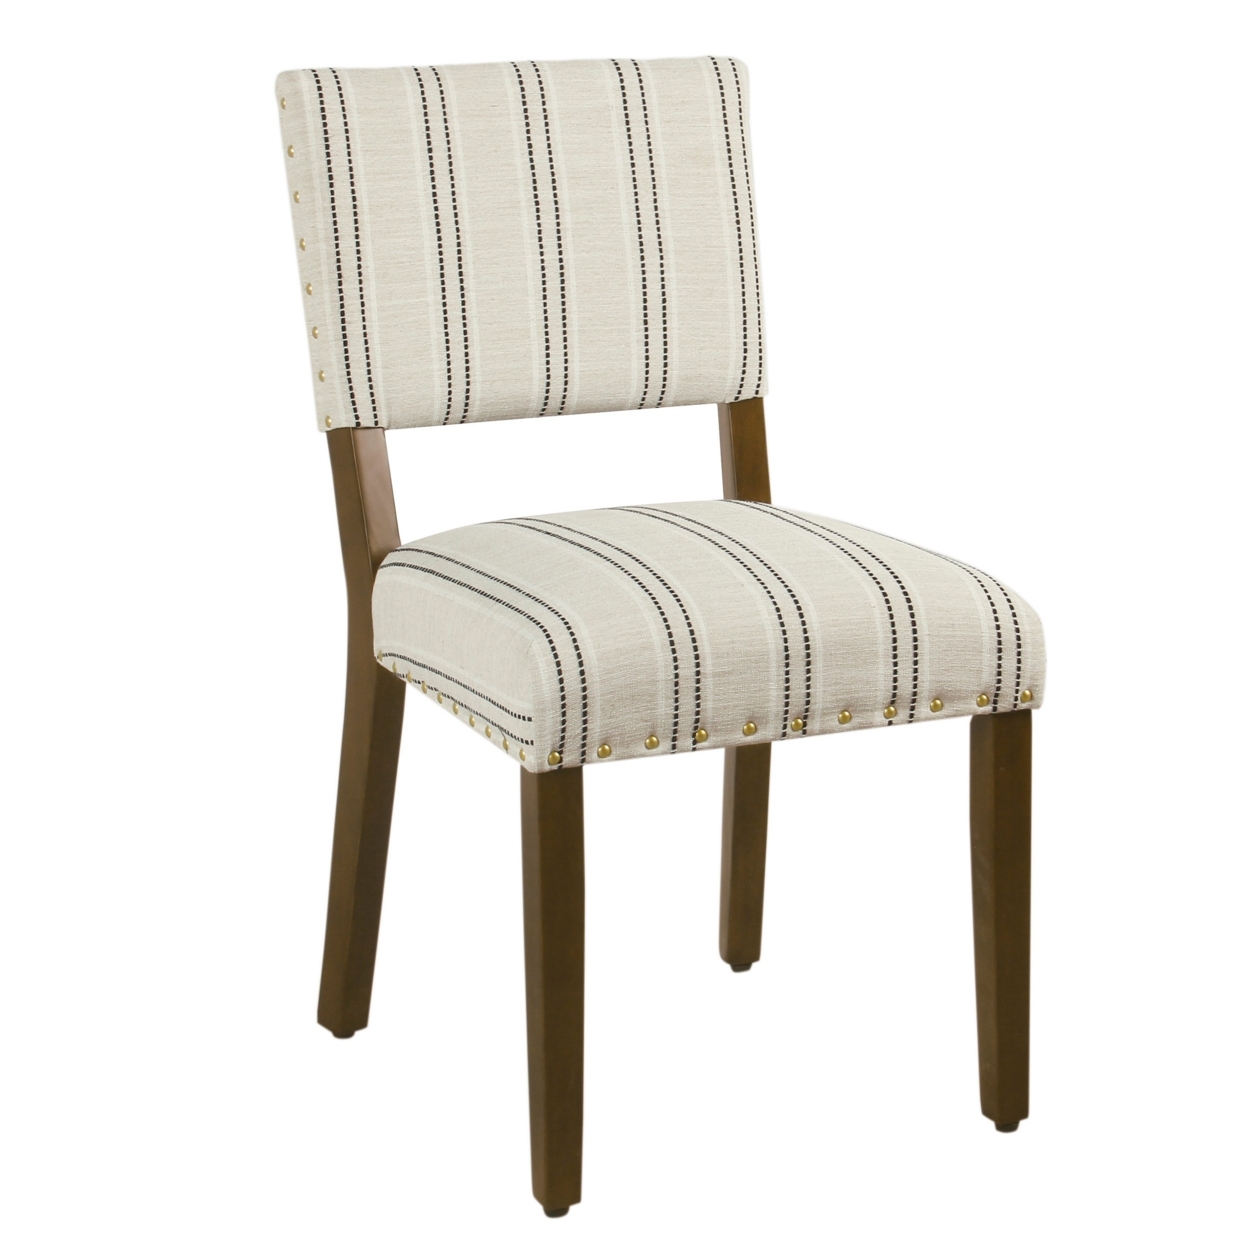 Wooden Dining Chair With Striped Pattern Fabric Cushioned Seat, Black And White, Set Of Two- Saltoro Sherpi